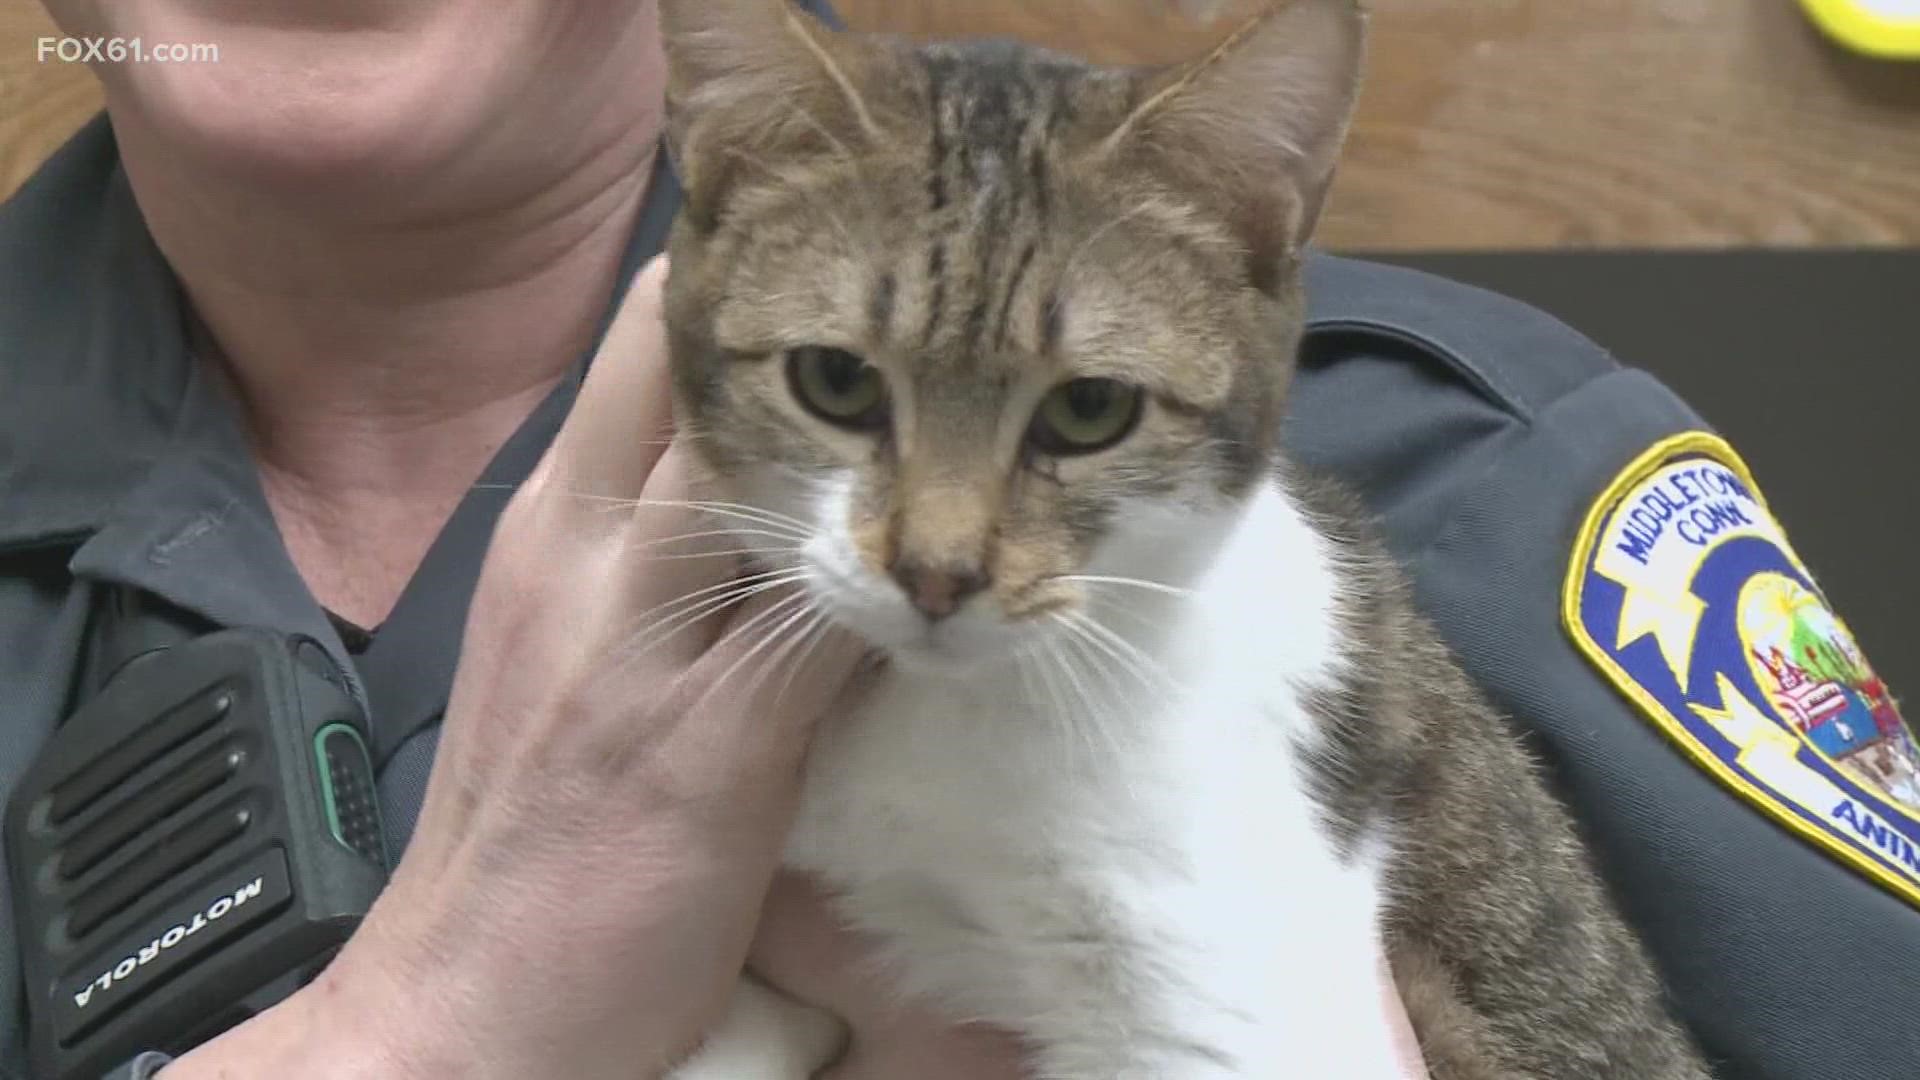 The Connecticut Humane Society offered to take in some of the cats, many of which have been adopted or brought to foster homes.